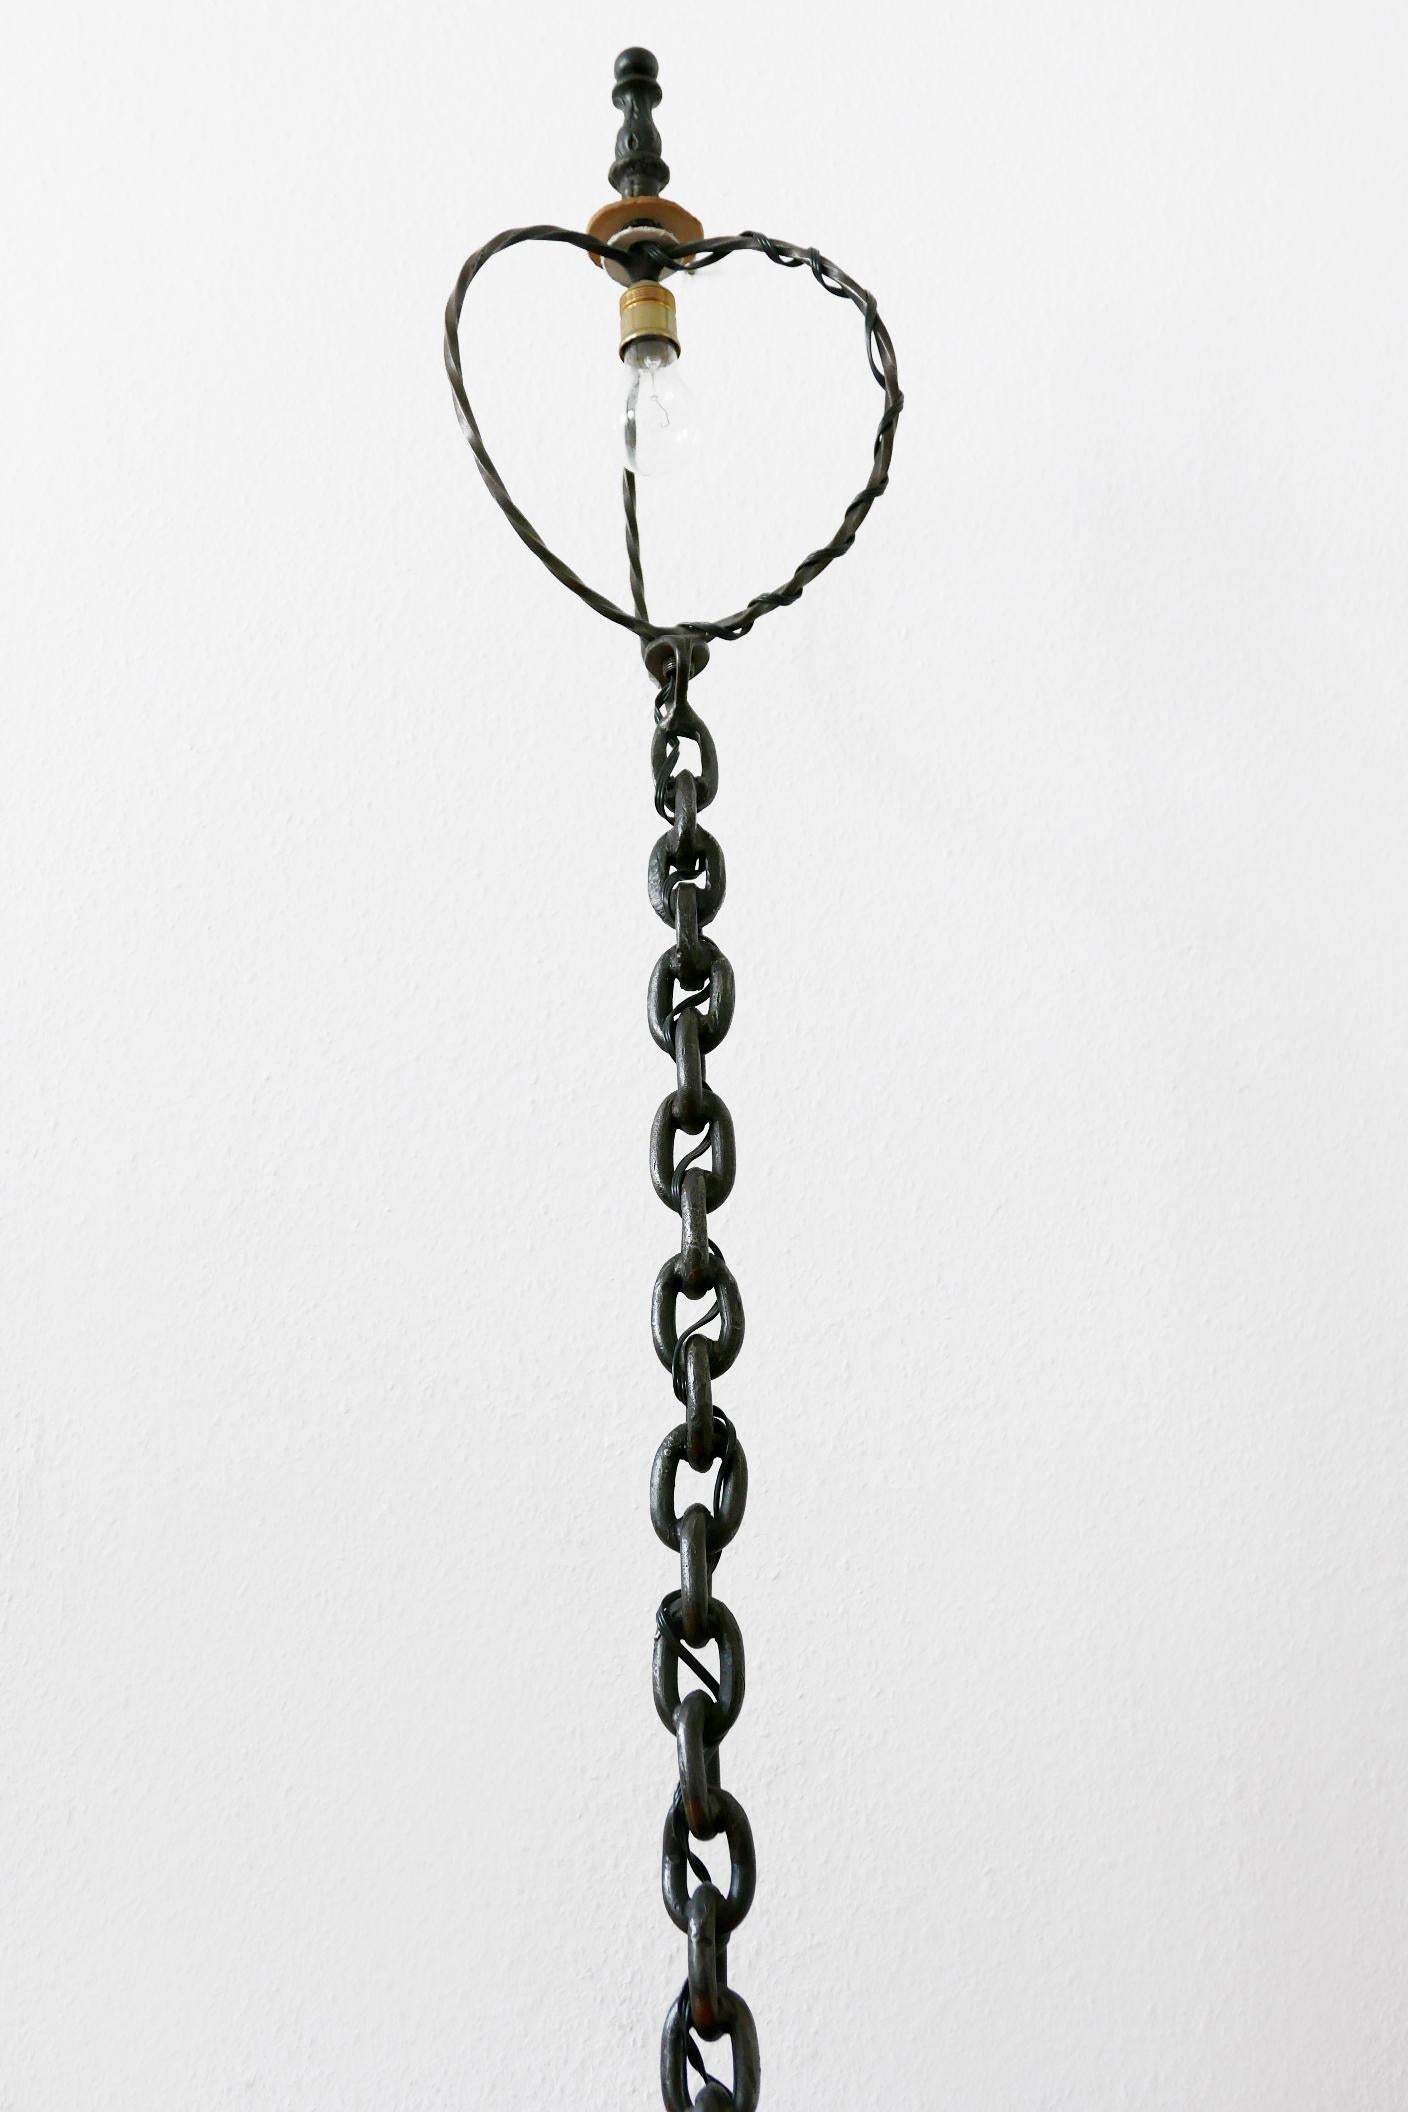 Mid-Century Modern Franz West Style Wrought Iron Chain Floor Lamp 1960s, Germany For Sale 9